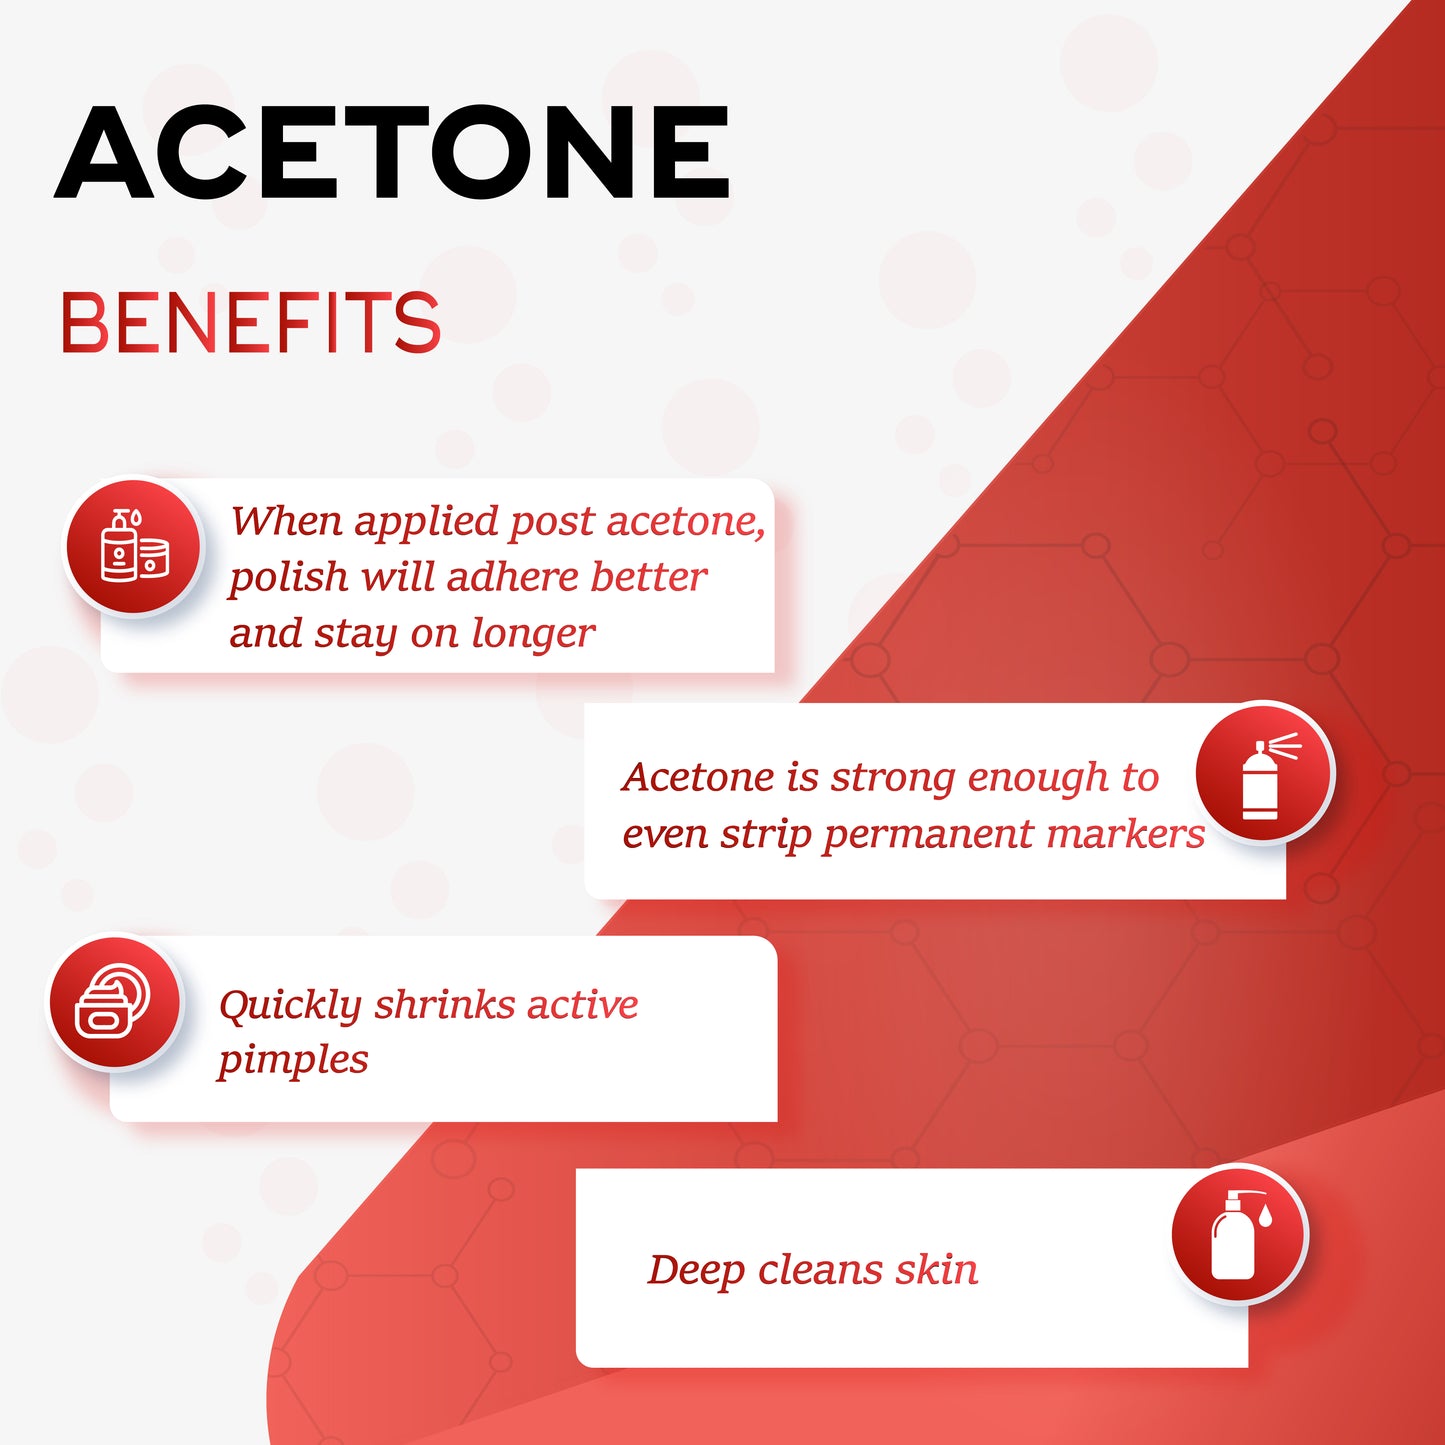 benefits of acetone, benefits listed of acetone